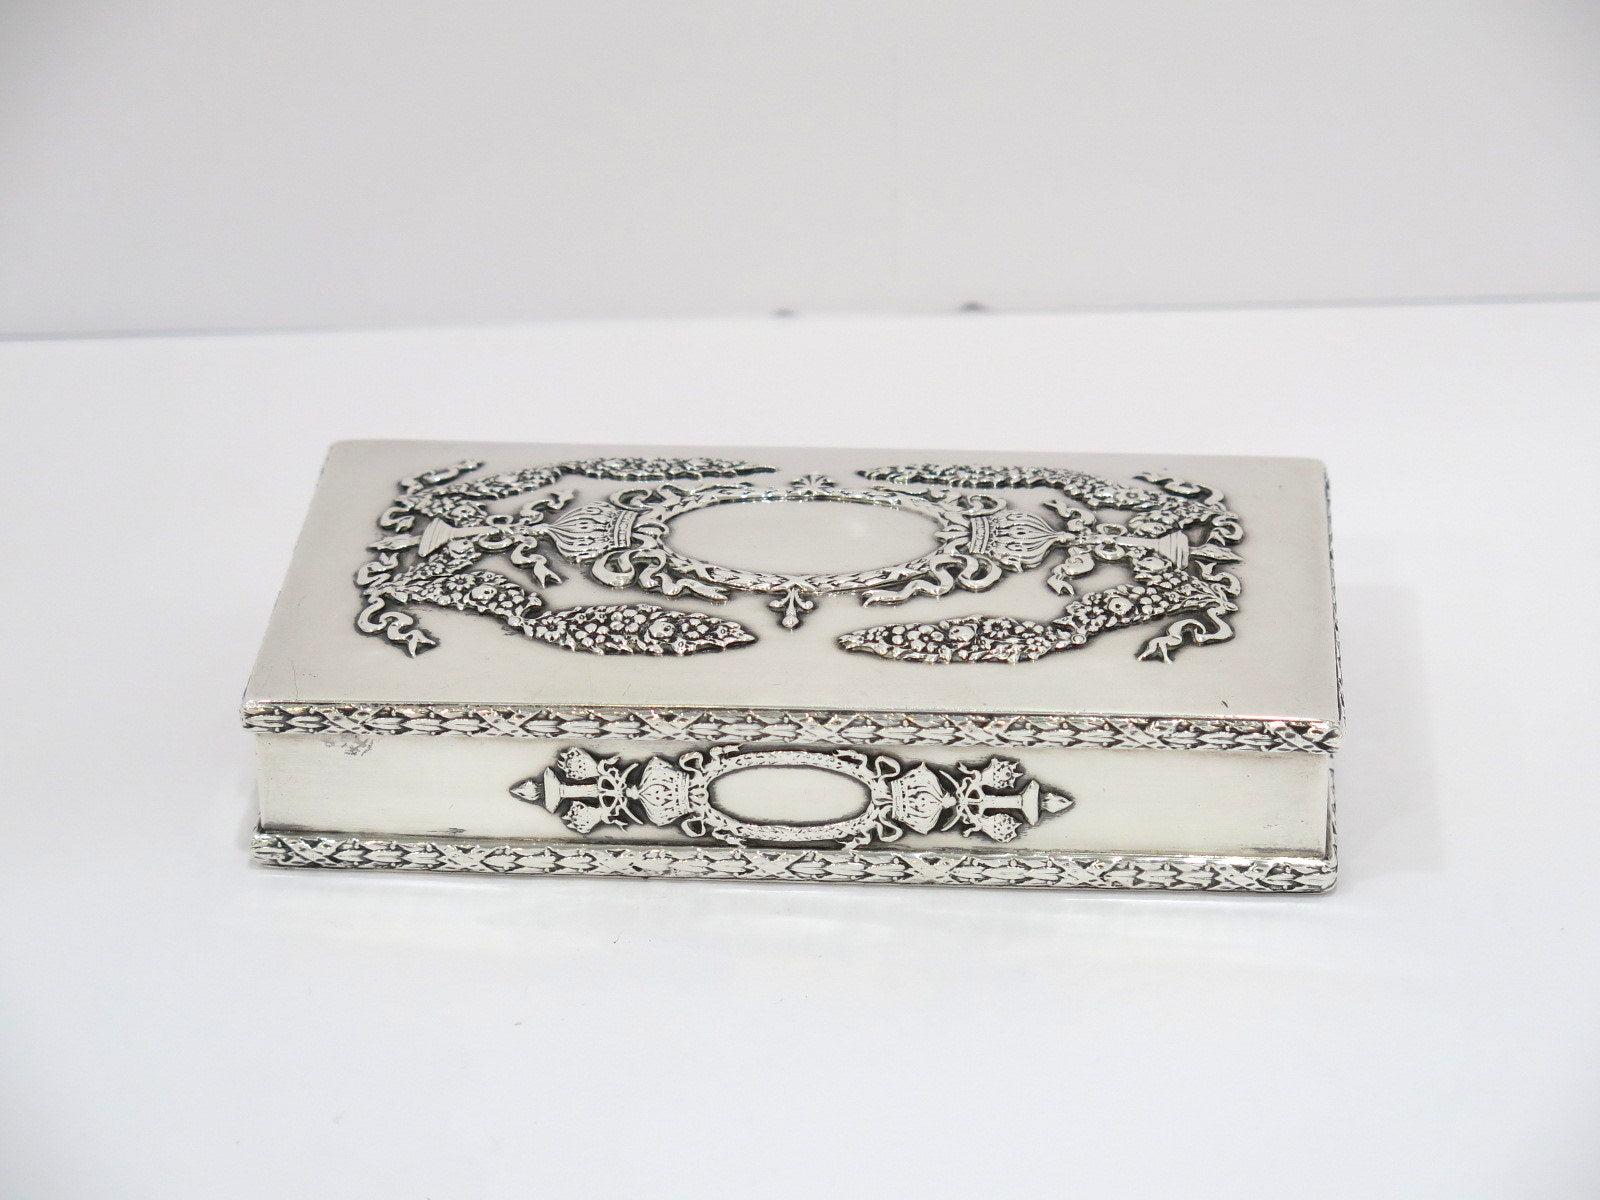 American Sterling Silver Gilt Interior Howard & Co. NY Antique Box w/ Sections For Sale